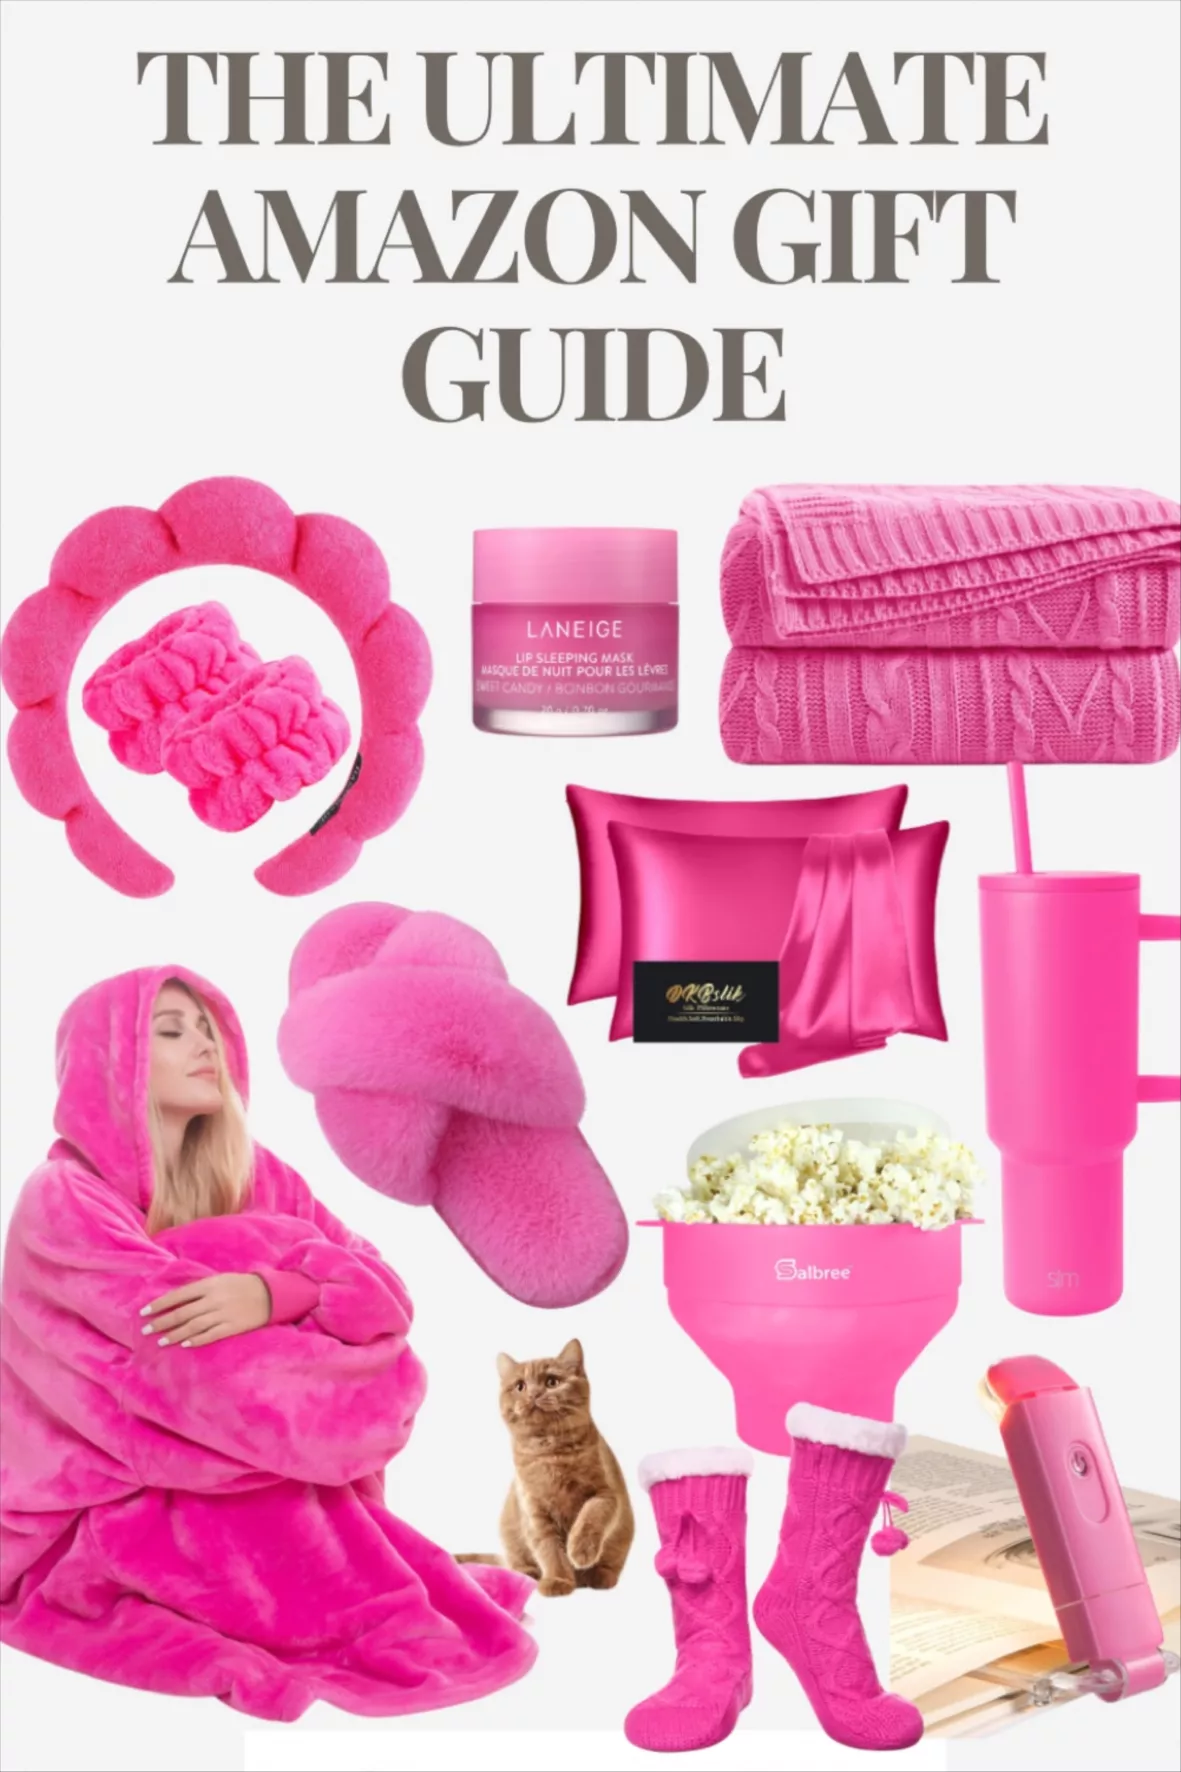 Girly Pink Gifts - Female Gift Ideas in Store